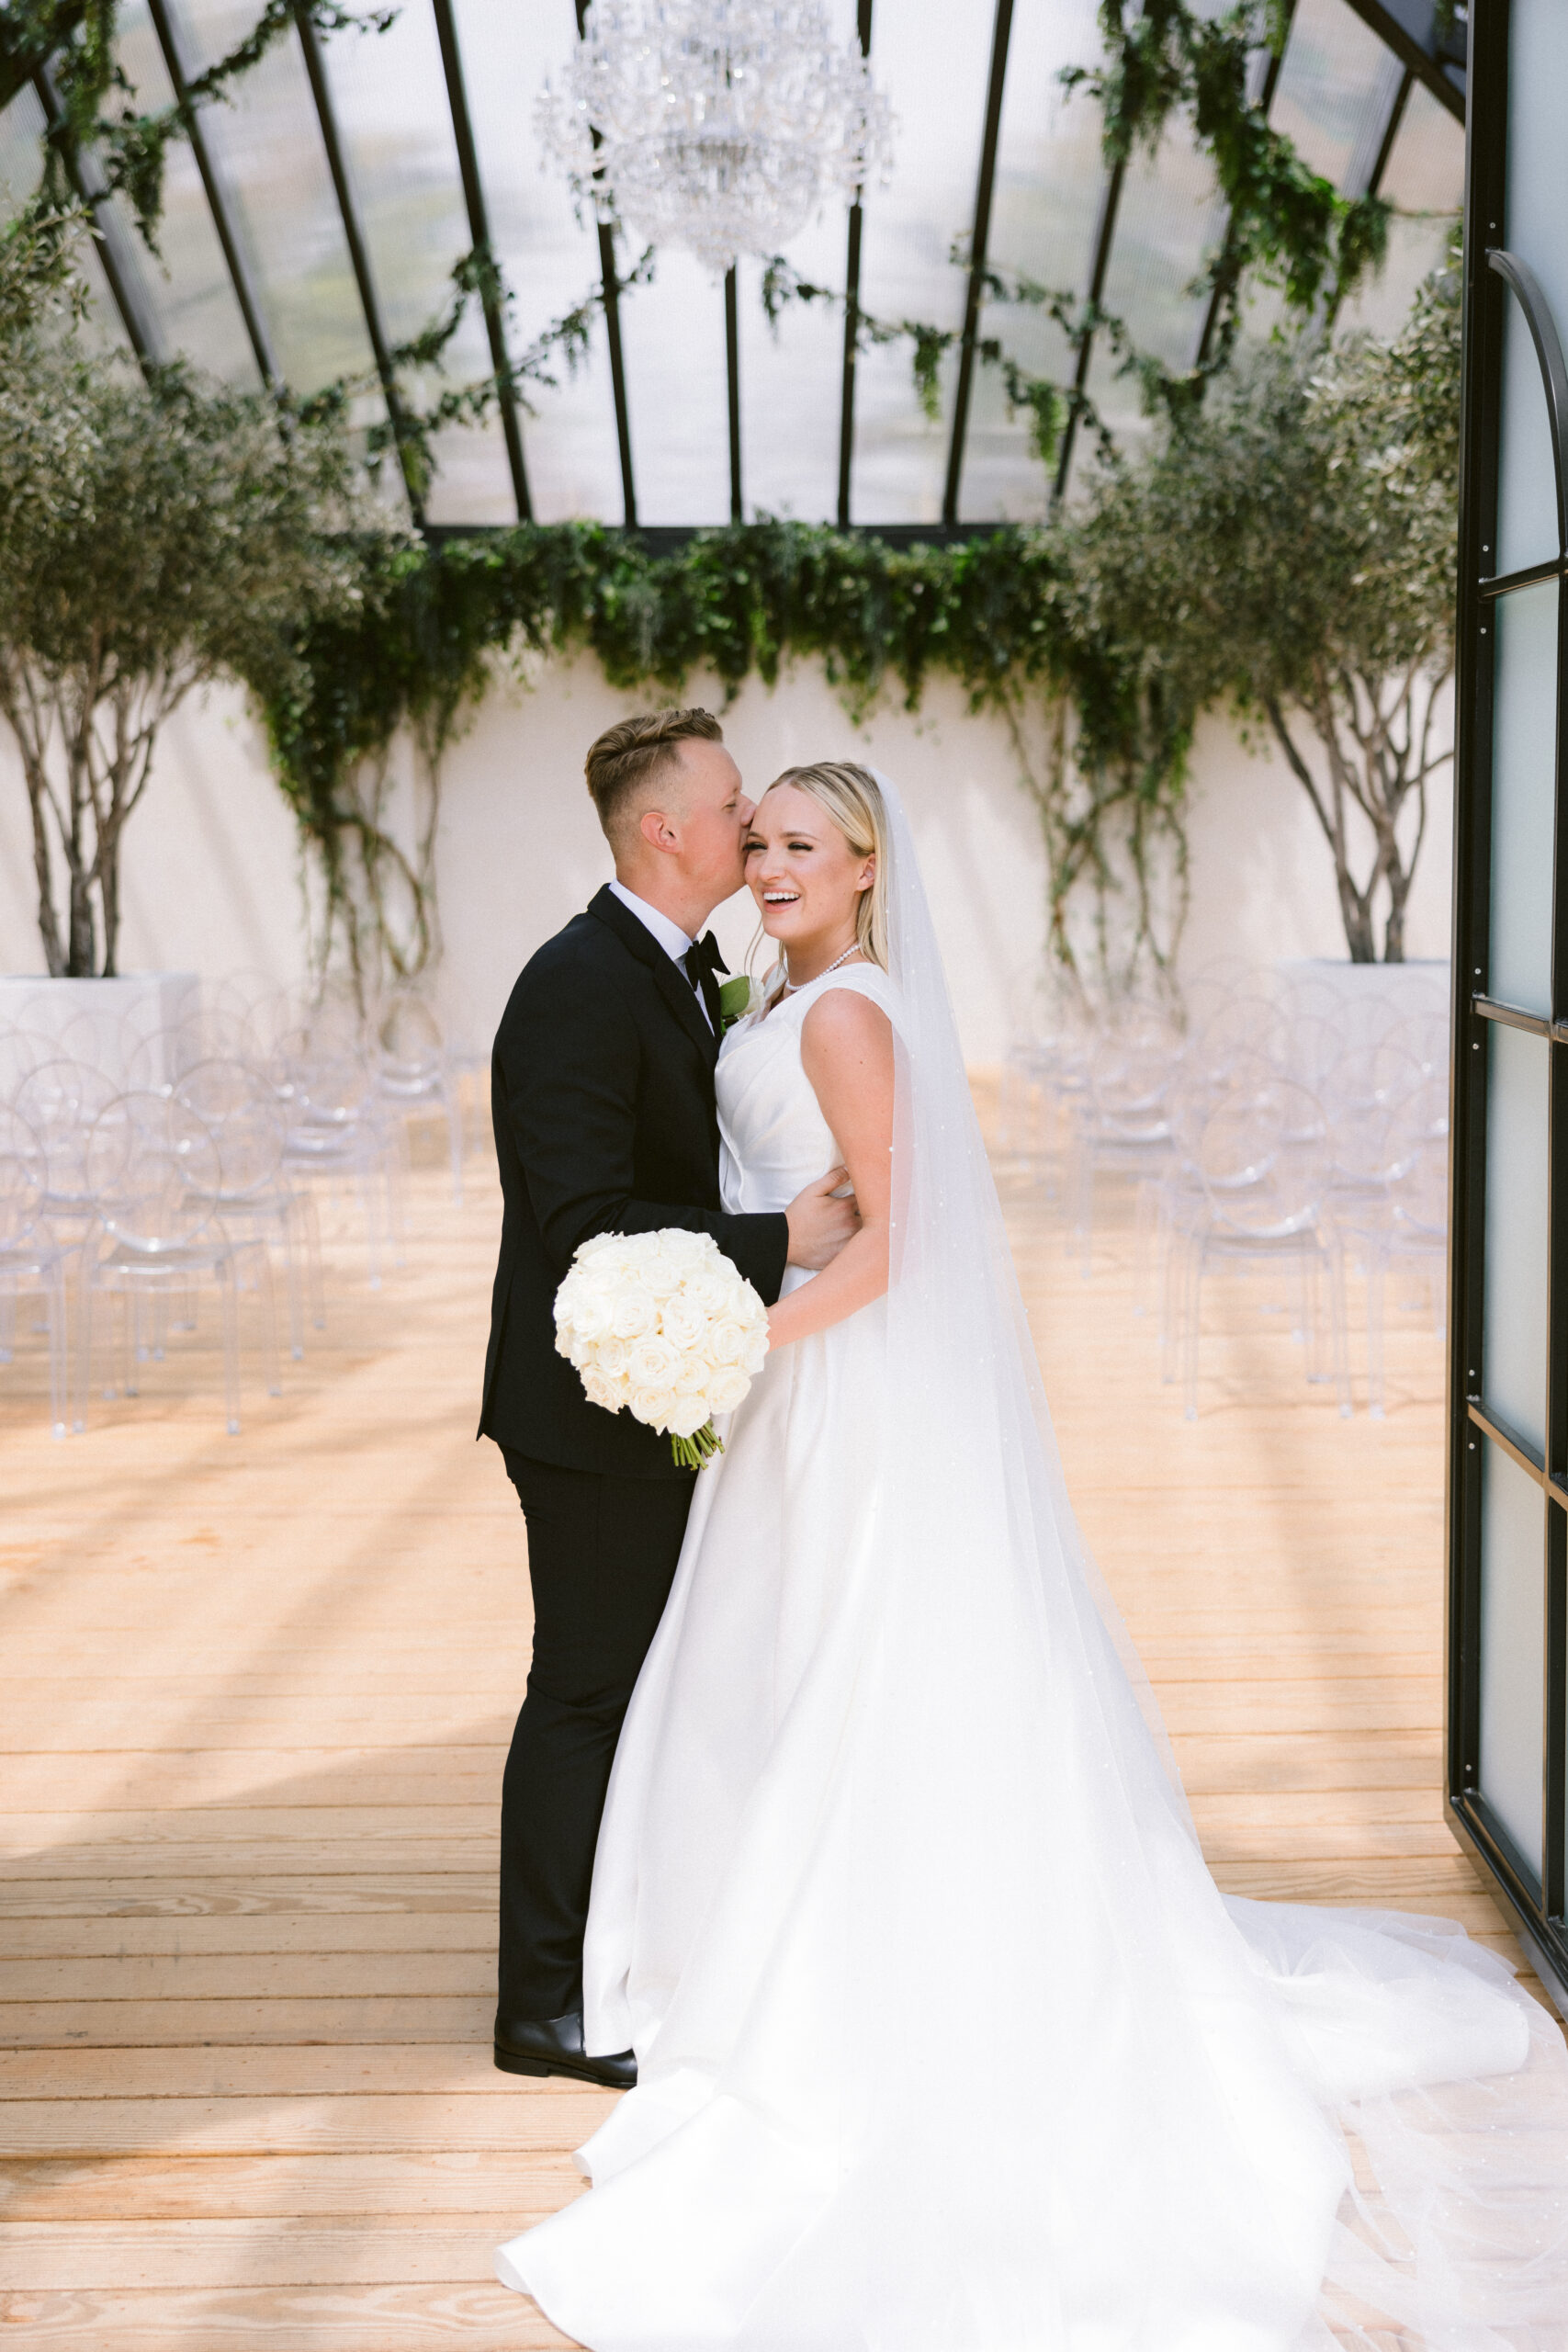 Bride and groom happily married looking at each other portrait photographed by Tatyana Zadorin Photography. Greenhouse Two rivers wedding venue